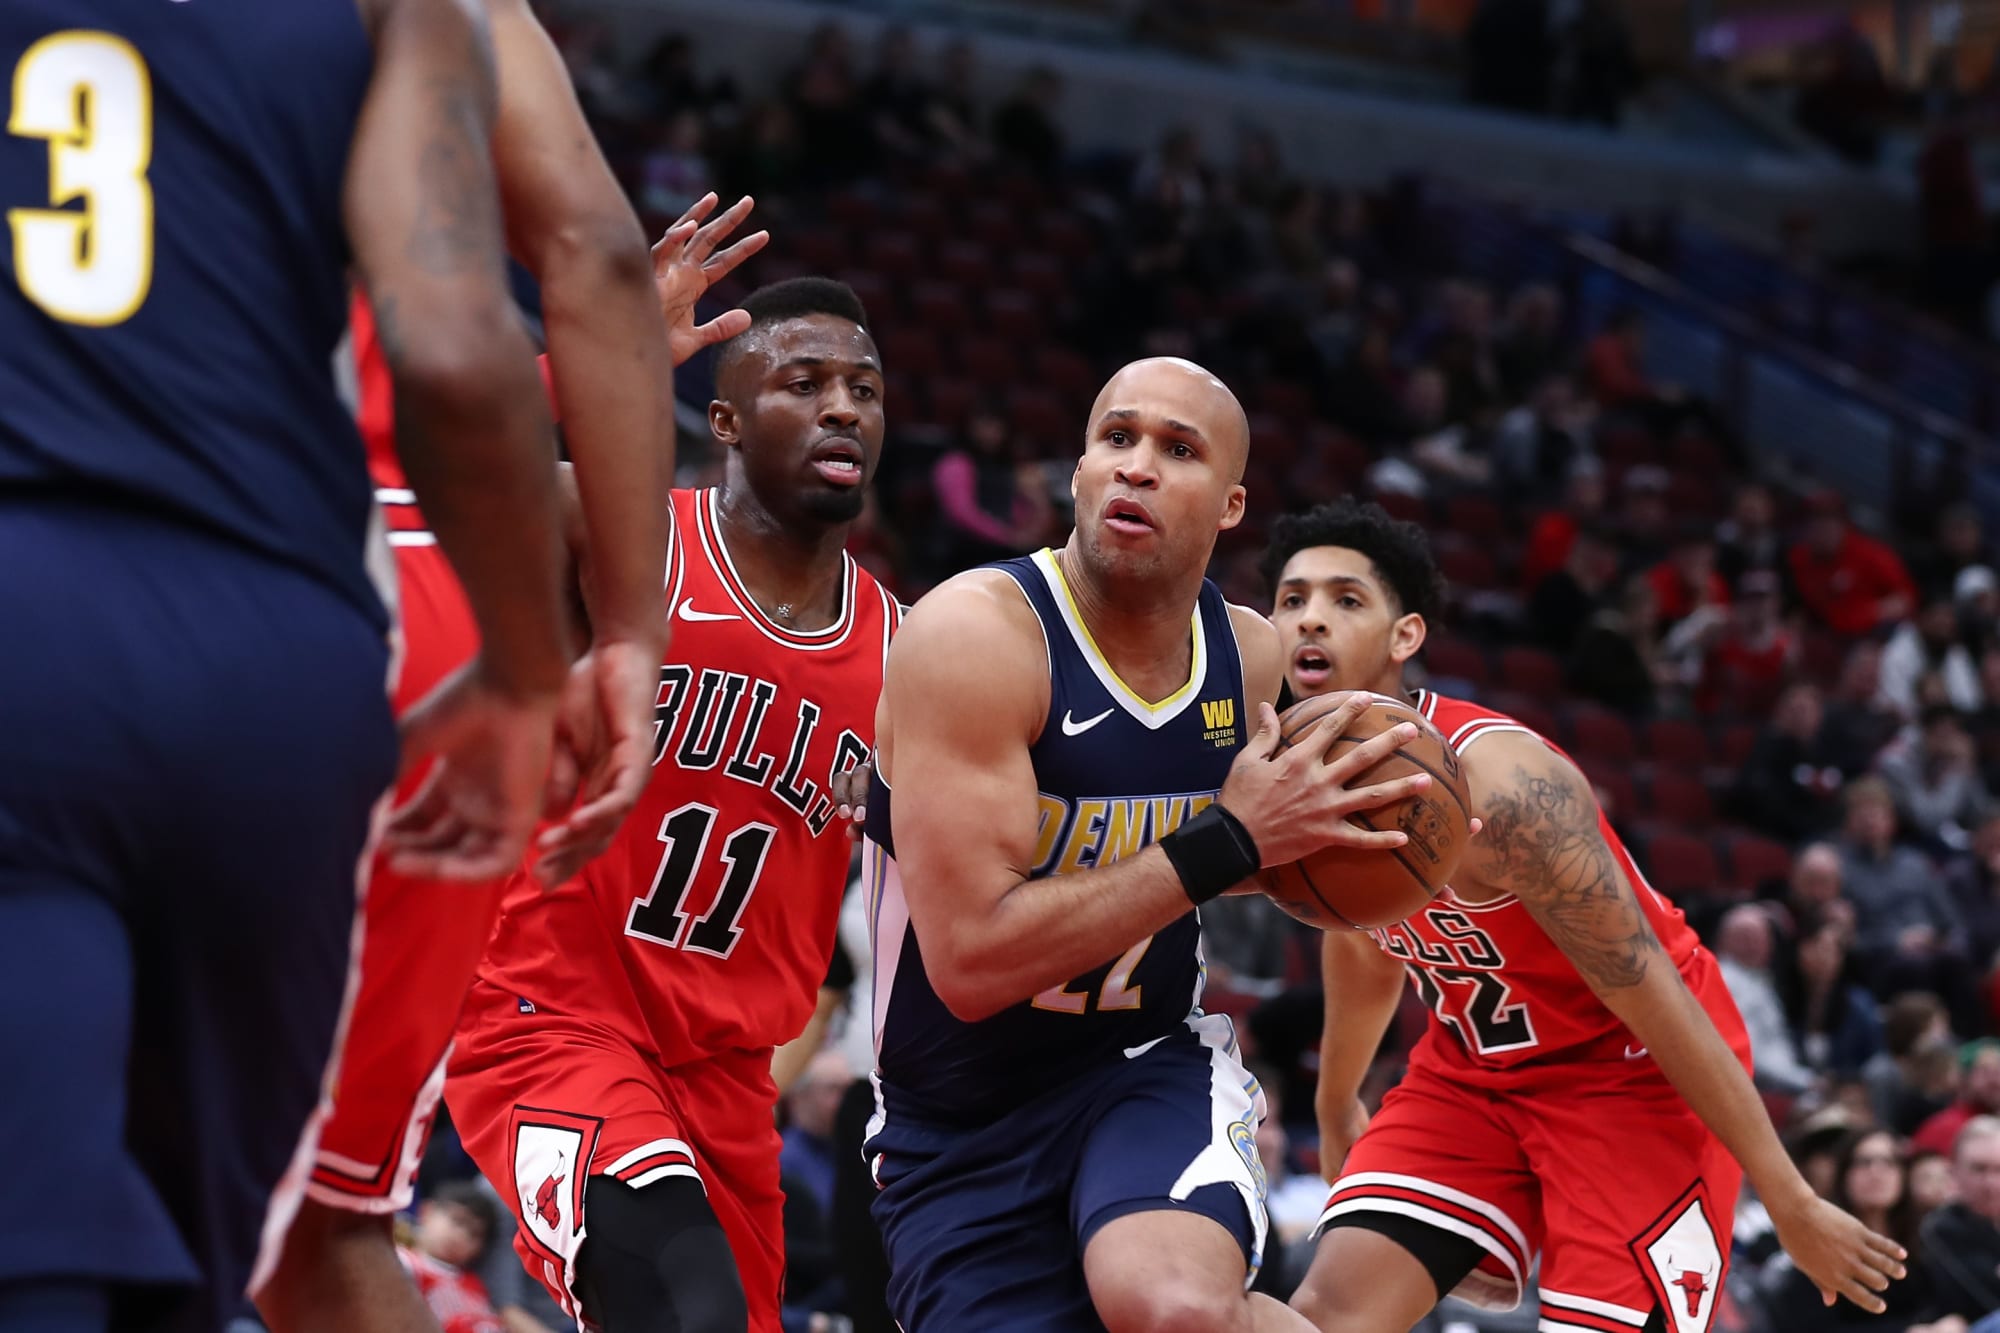 The Denver Nuggets were able to defeat the Bulls on the road.